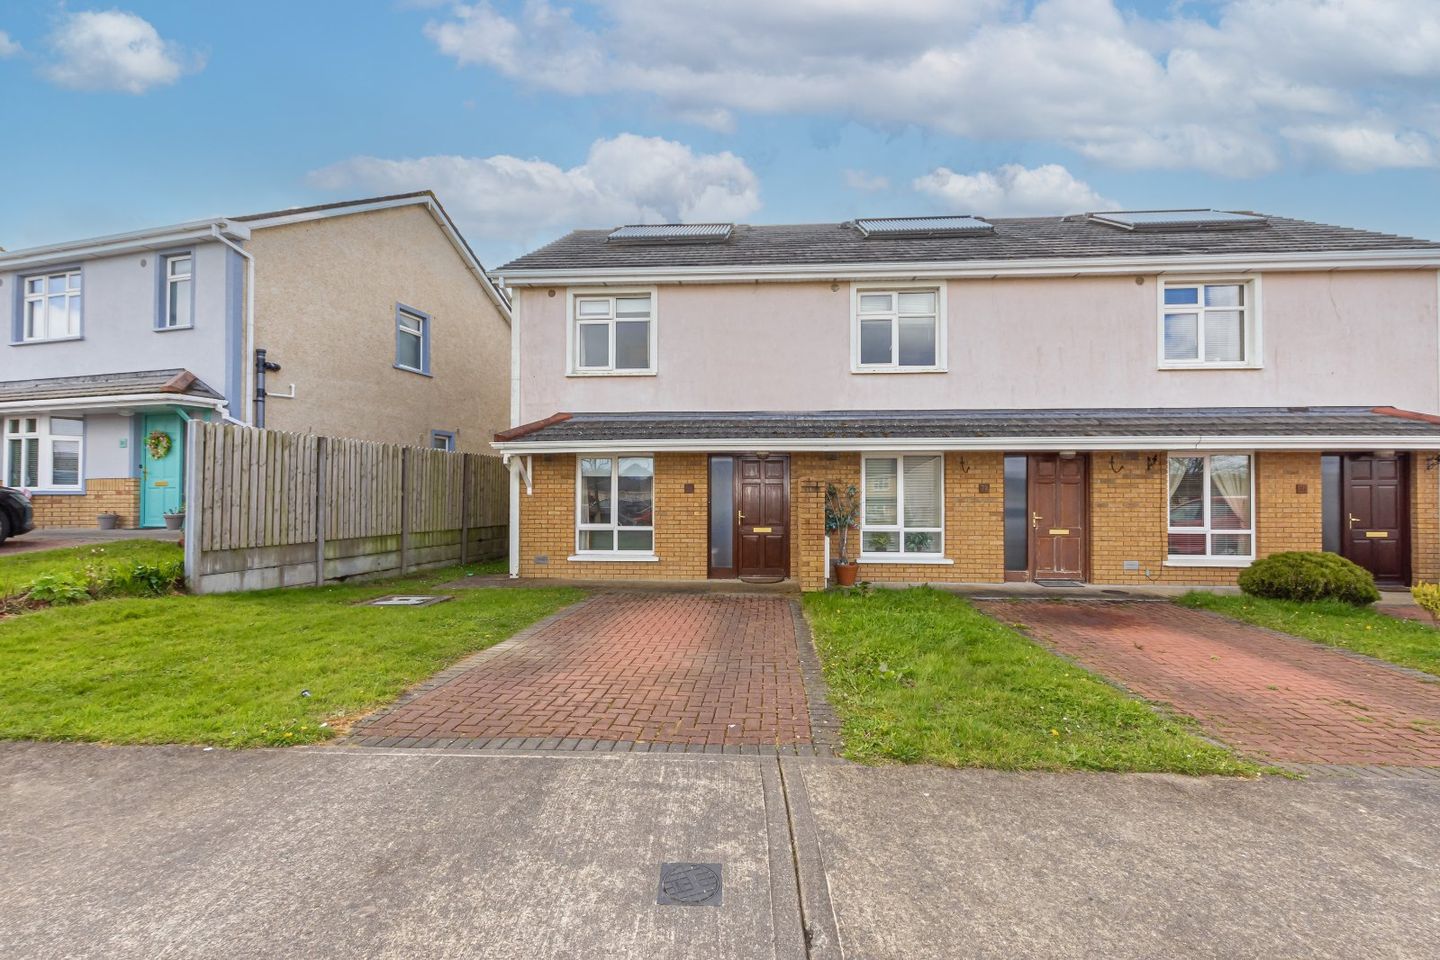 31 Cnoic Caislean, Ballygunner, Waterford City, Co. Waterford, X91VXF8